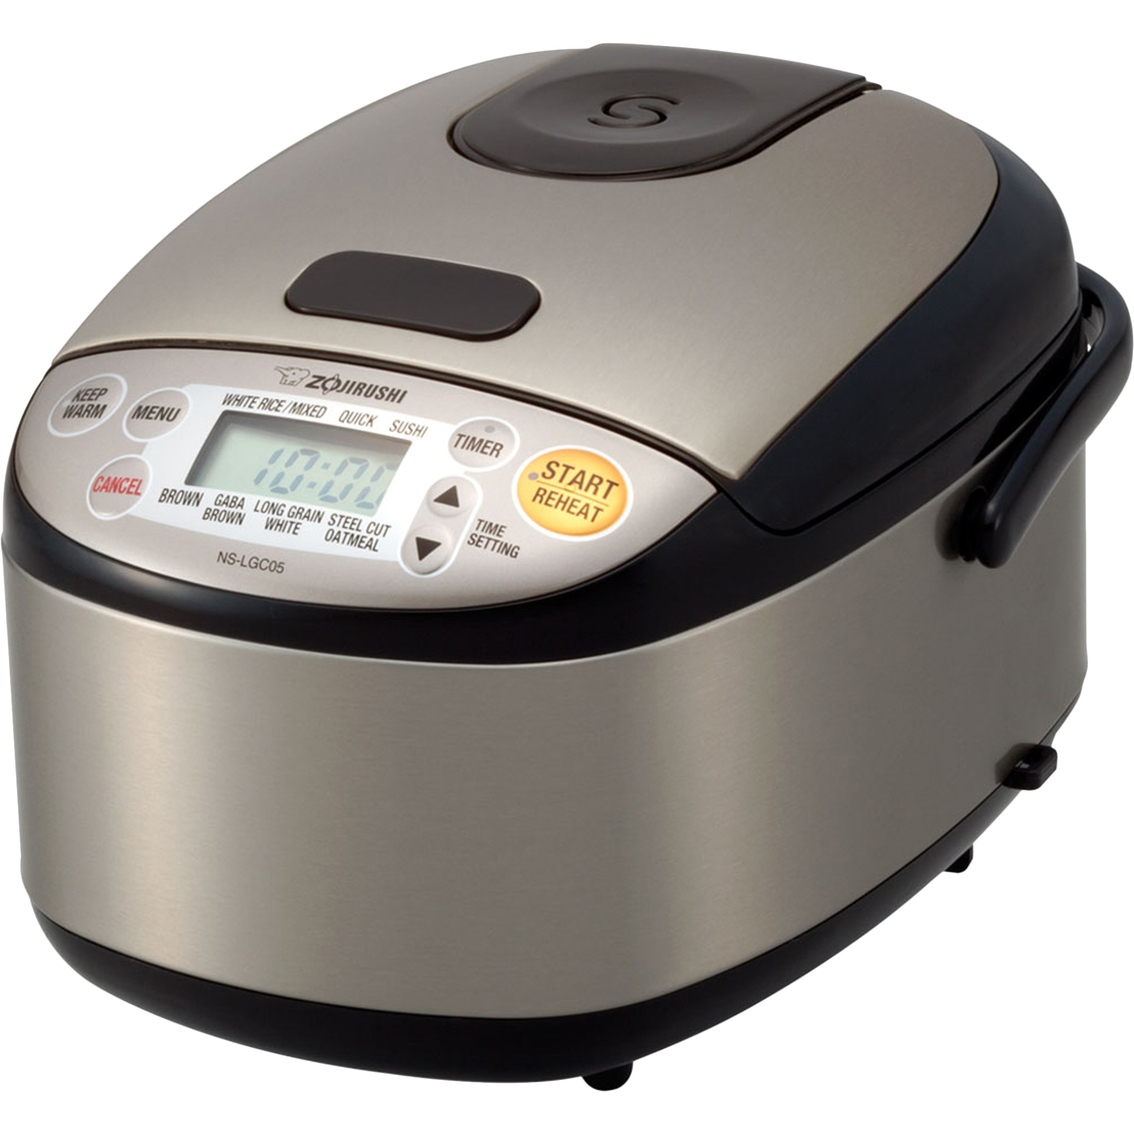 Zojirushi 3 Cup Micom Rice Cooker And Warmer | Cookers & Steamers ...